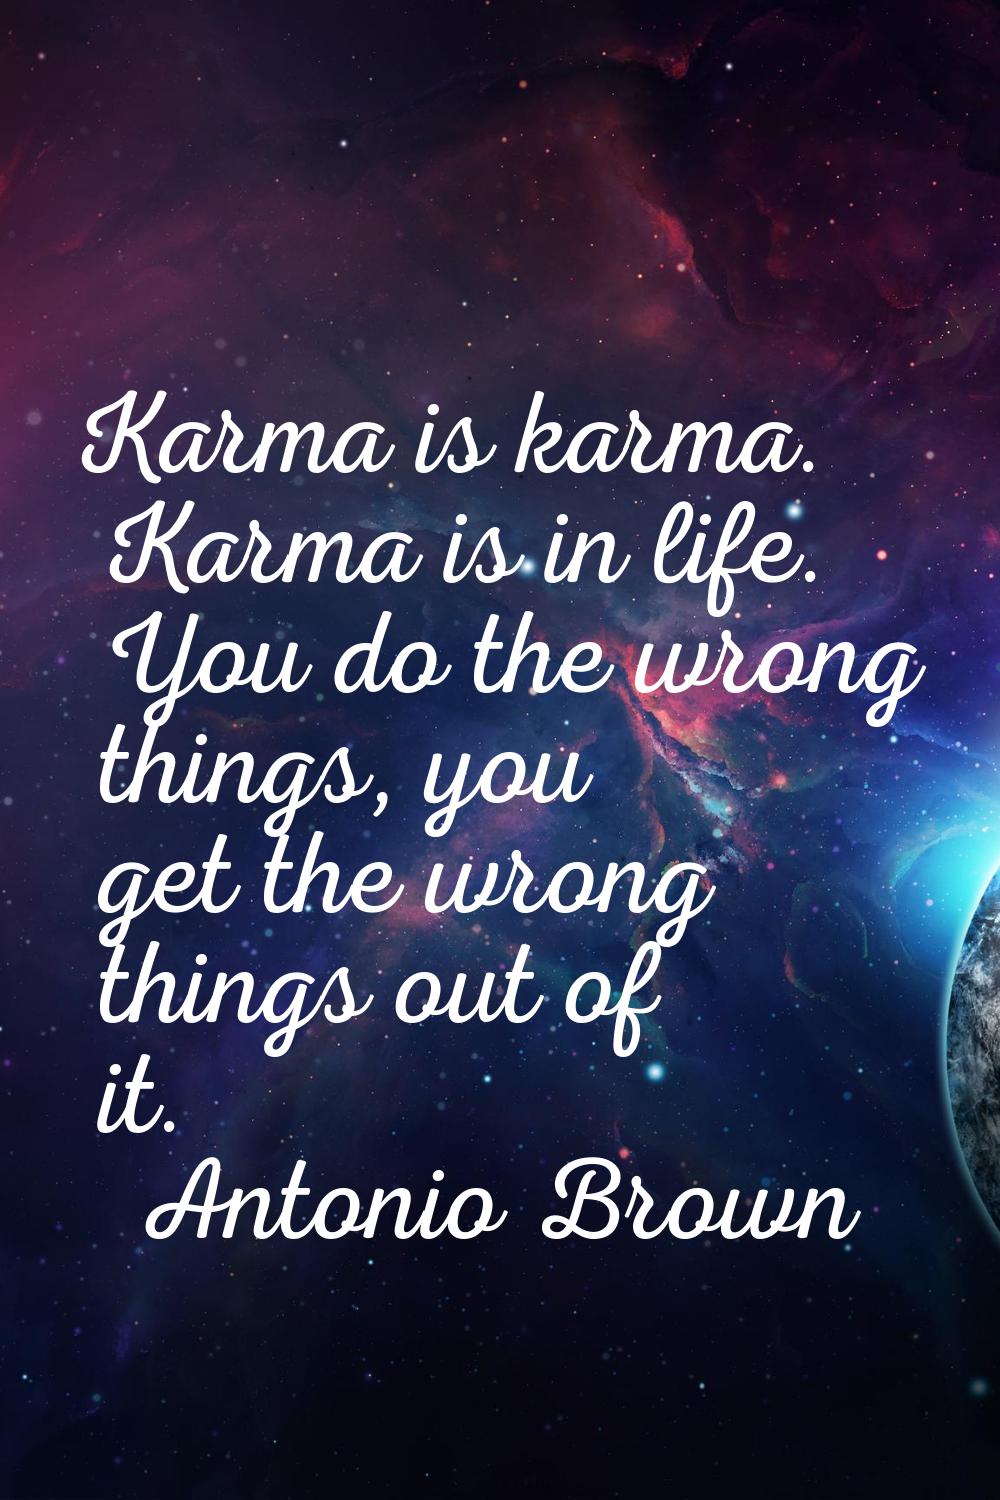 Karma is karma. Karma is in life. You do the wrong things, you get the wrong things out of it.